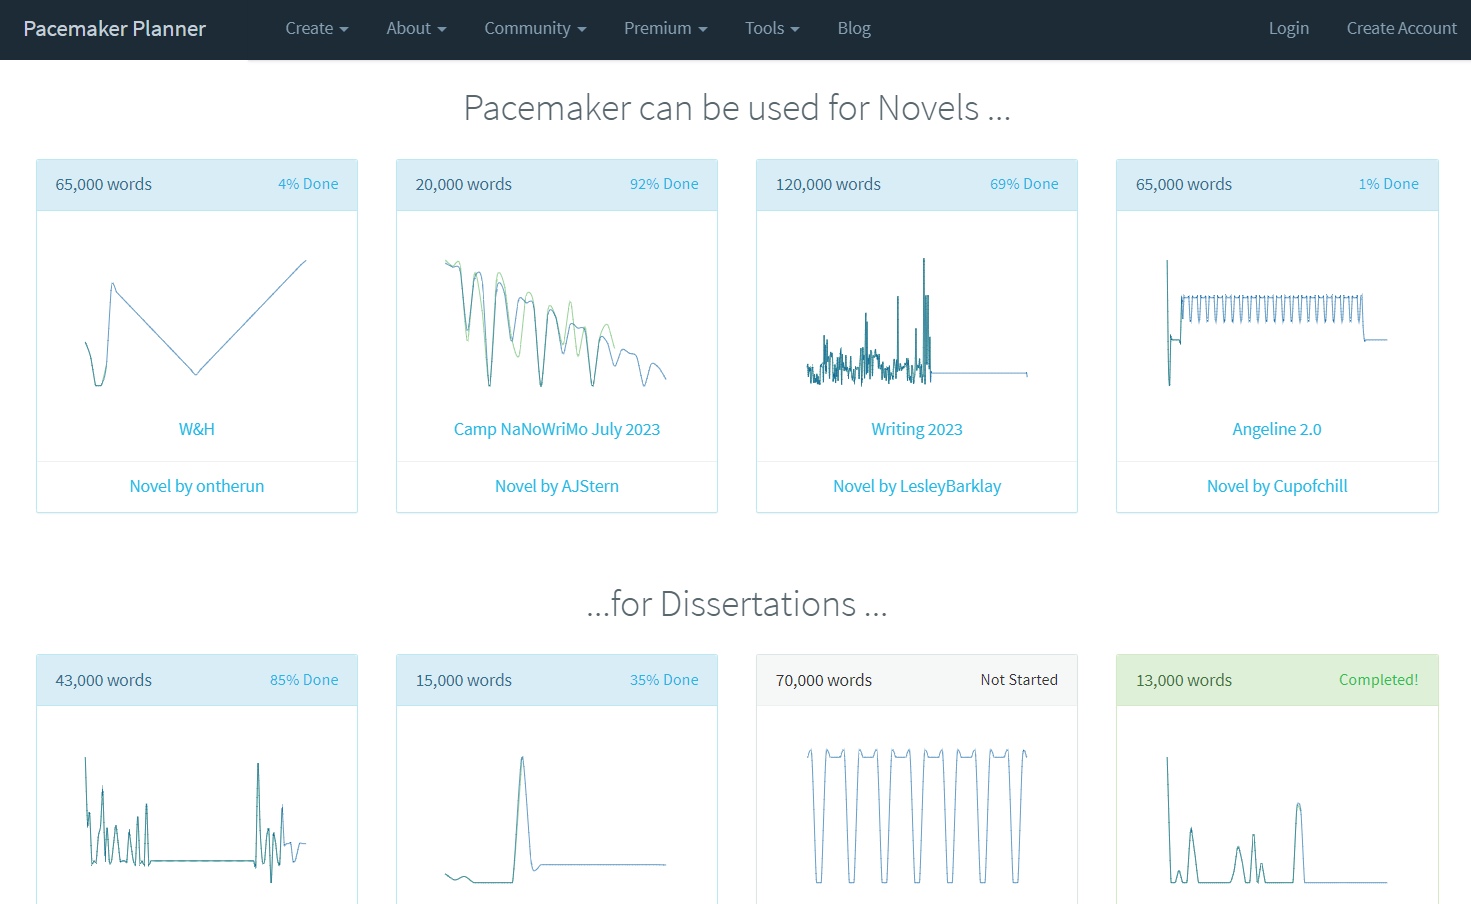 Pacemaker Planner site showing users’ progress graphs.